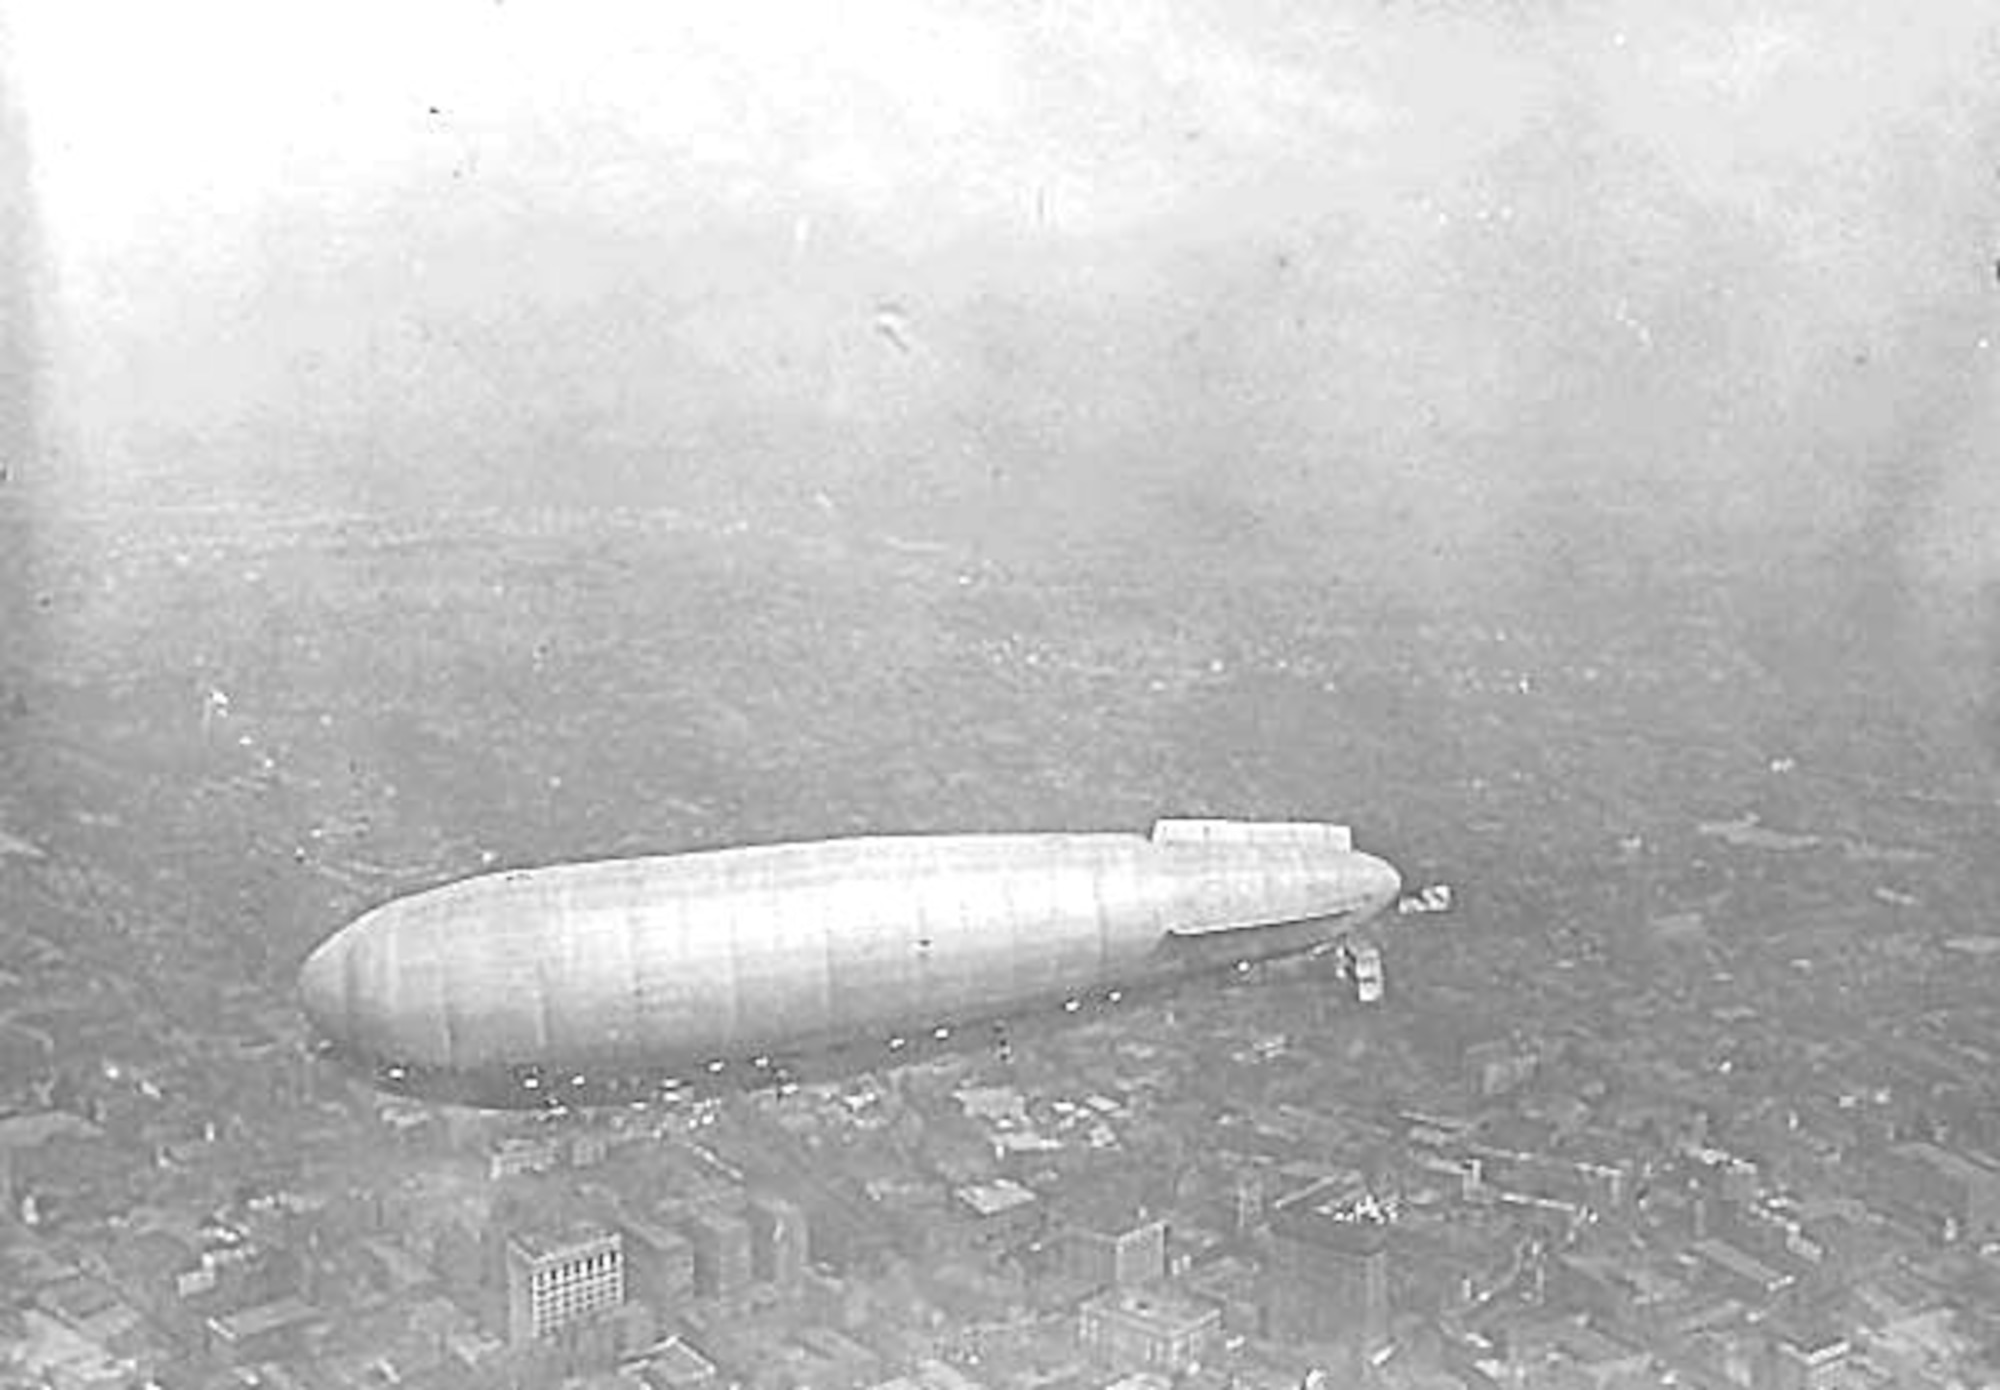 Pictured is the Army airship Roma. Roma crashed during a test flight on 21 Feb., 1922 claiming 34 lives. (Courtesy photo)